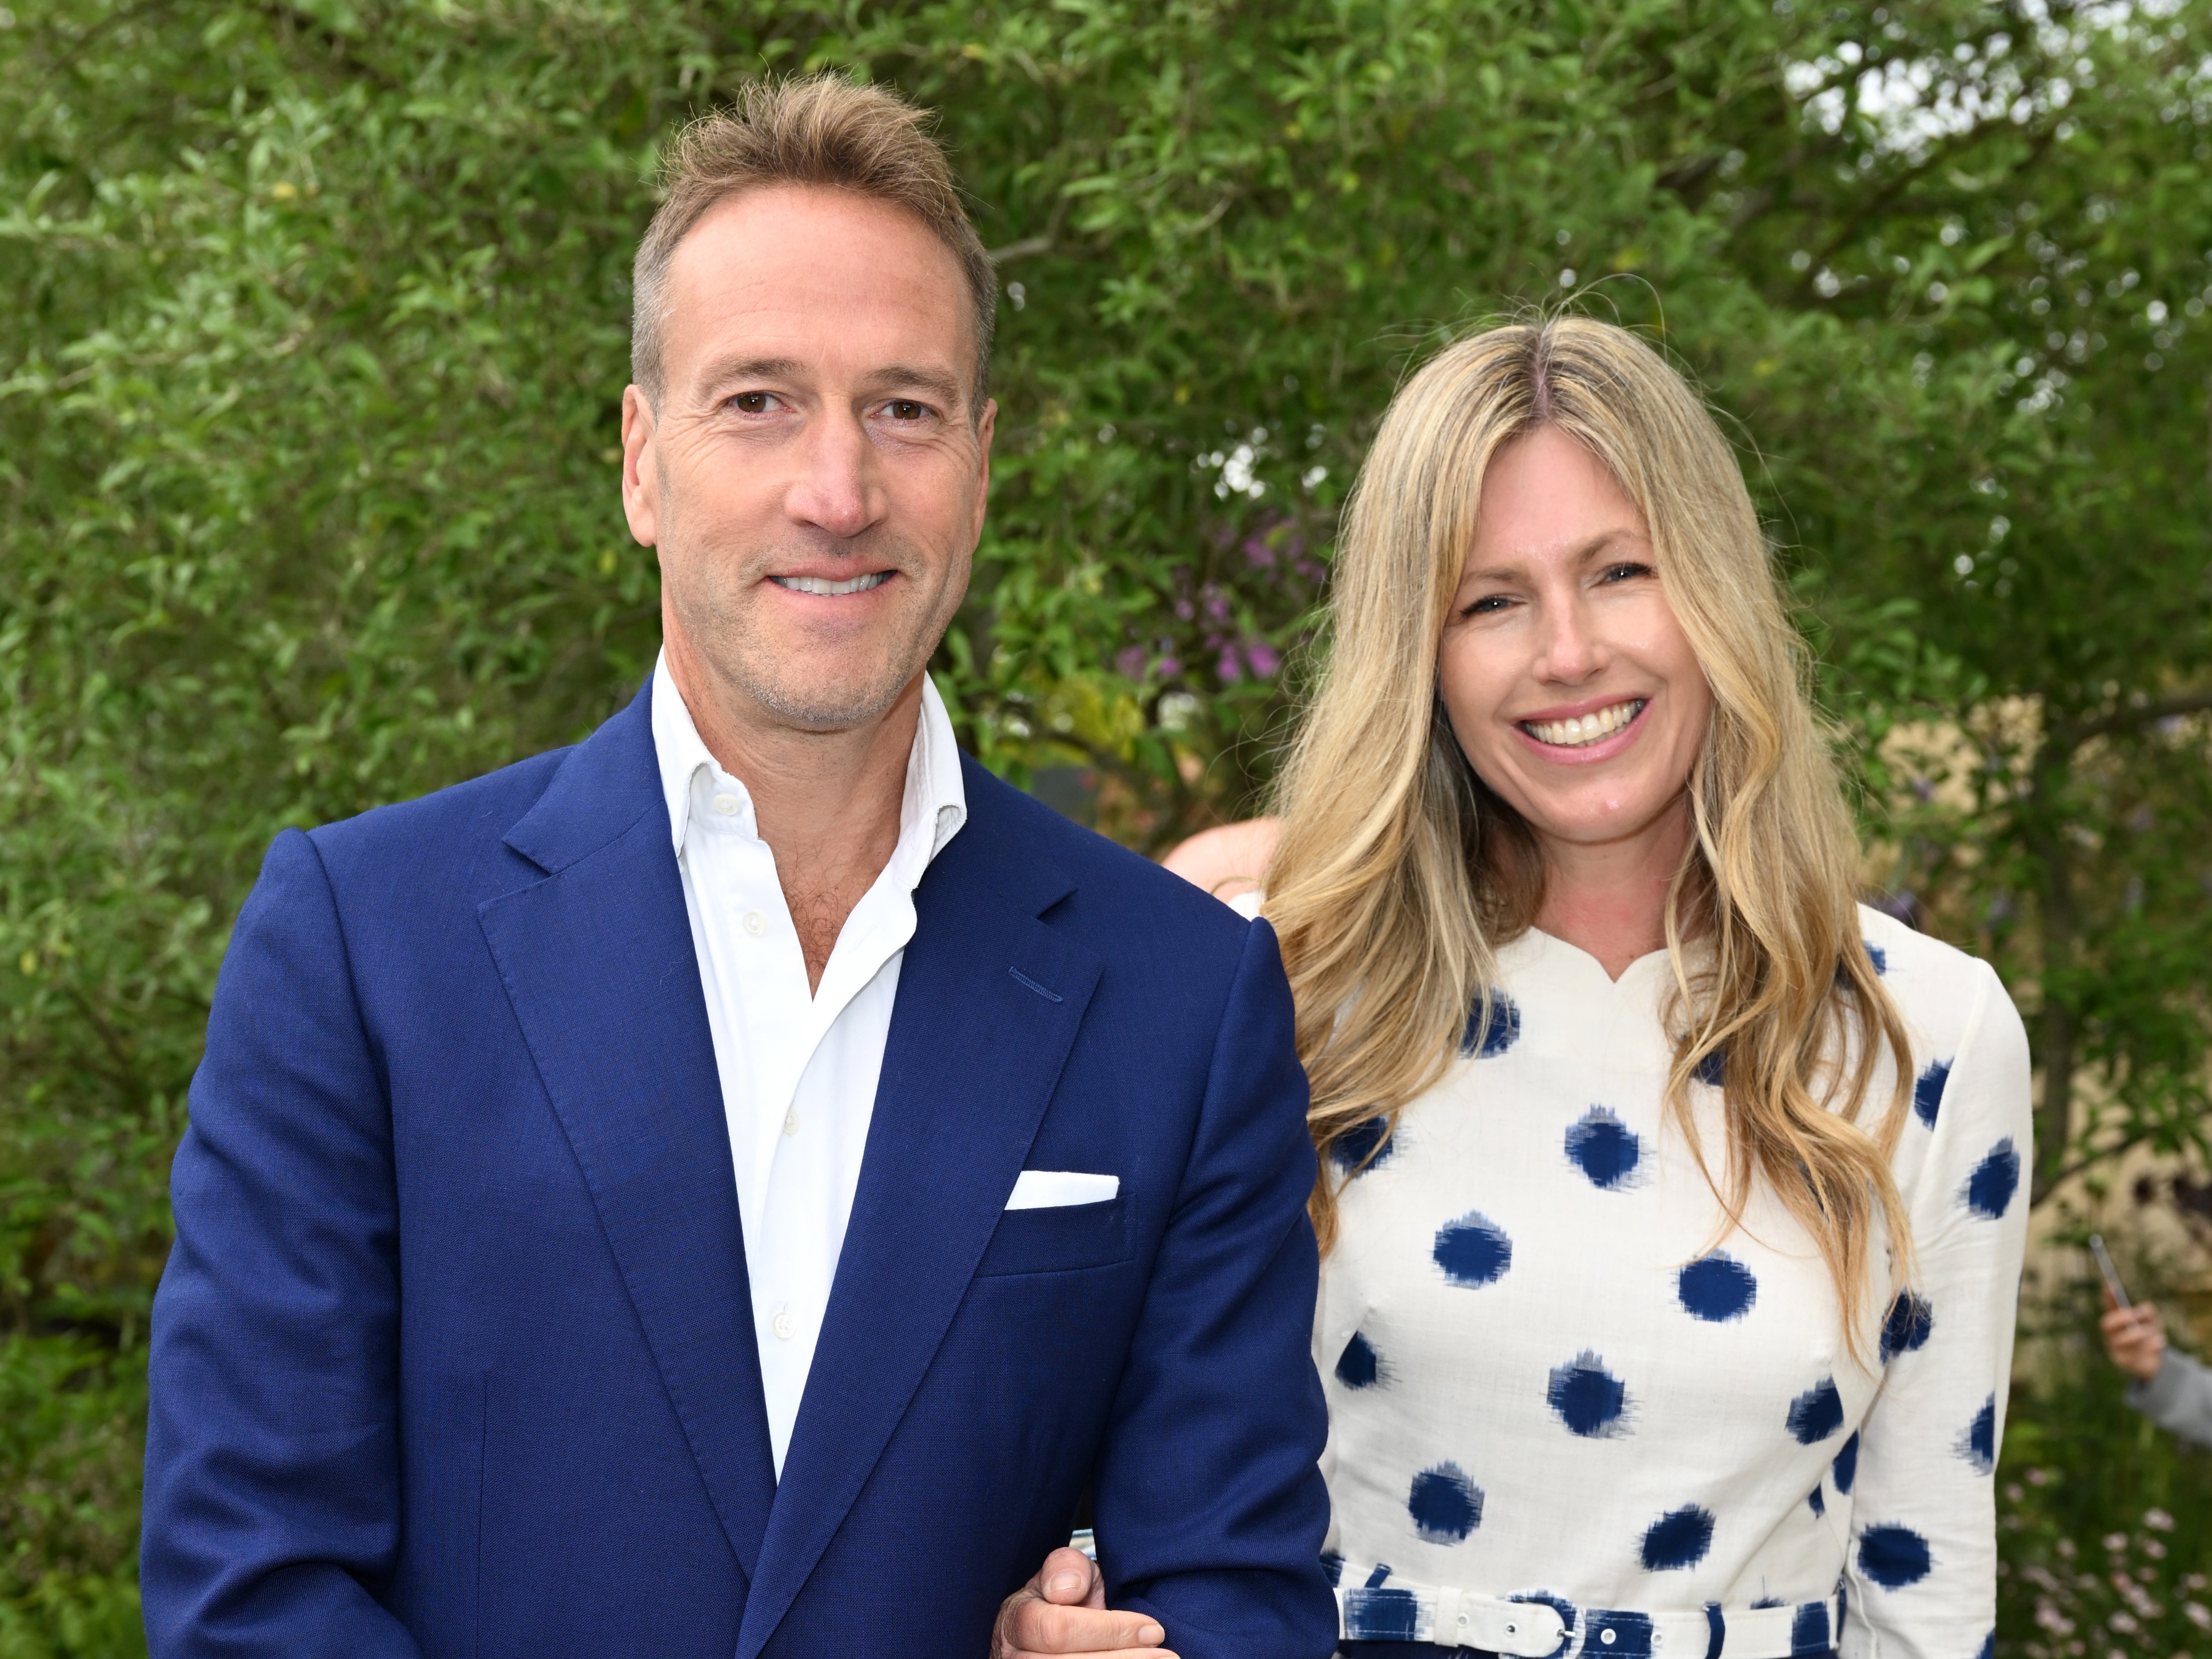 Ben Fogle and Marina Fogle attend the 2023 Chelsea Flower Show at Royal Hospital Chelsea on May 22, 2023